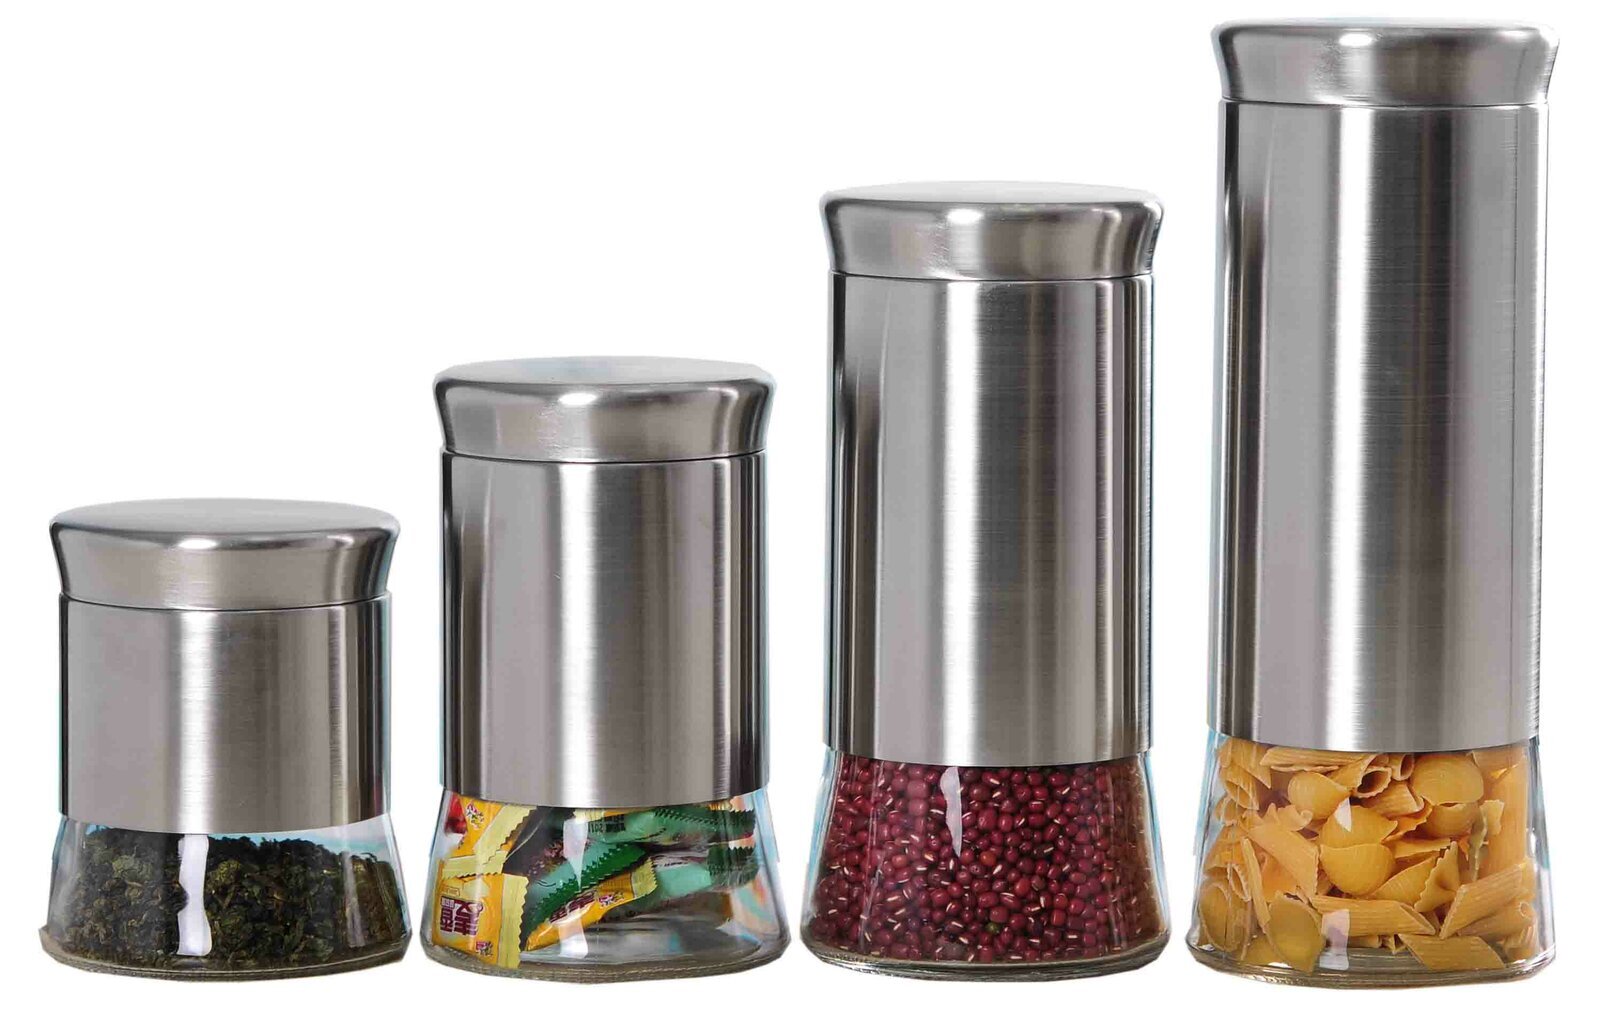 Stainless Steel Unusual Canisters Mimicking Spice Shakers